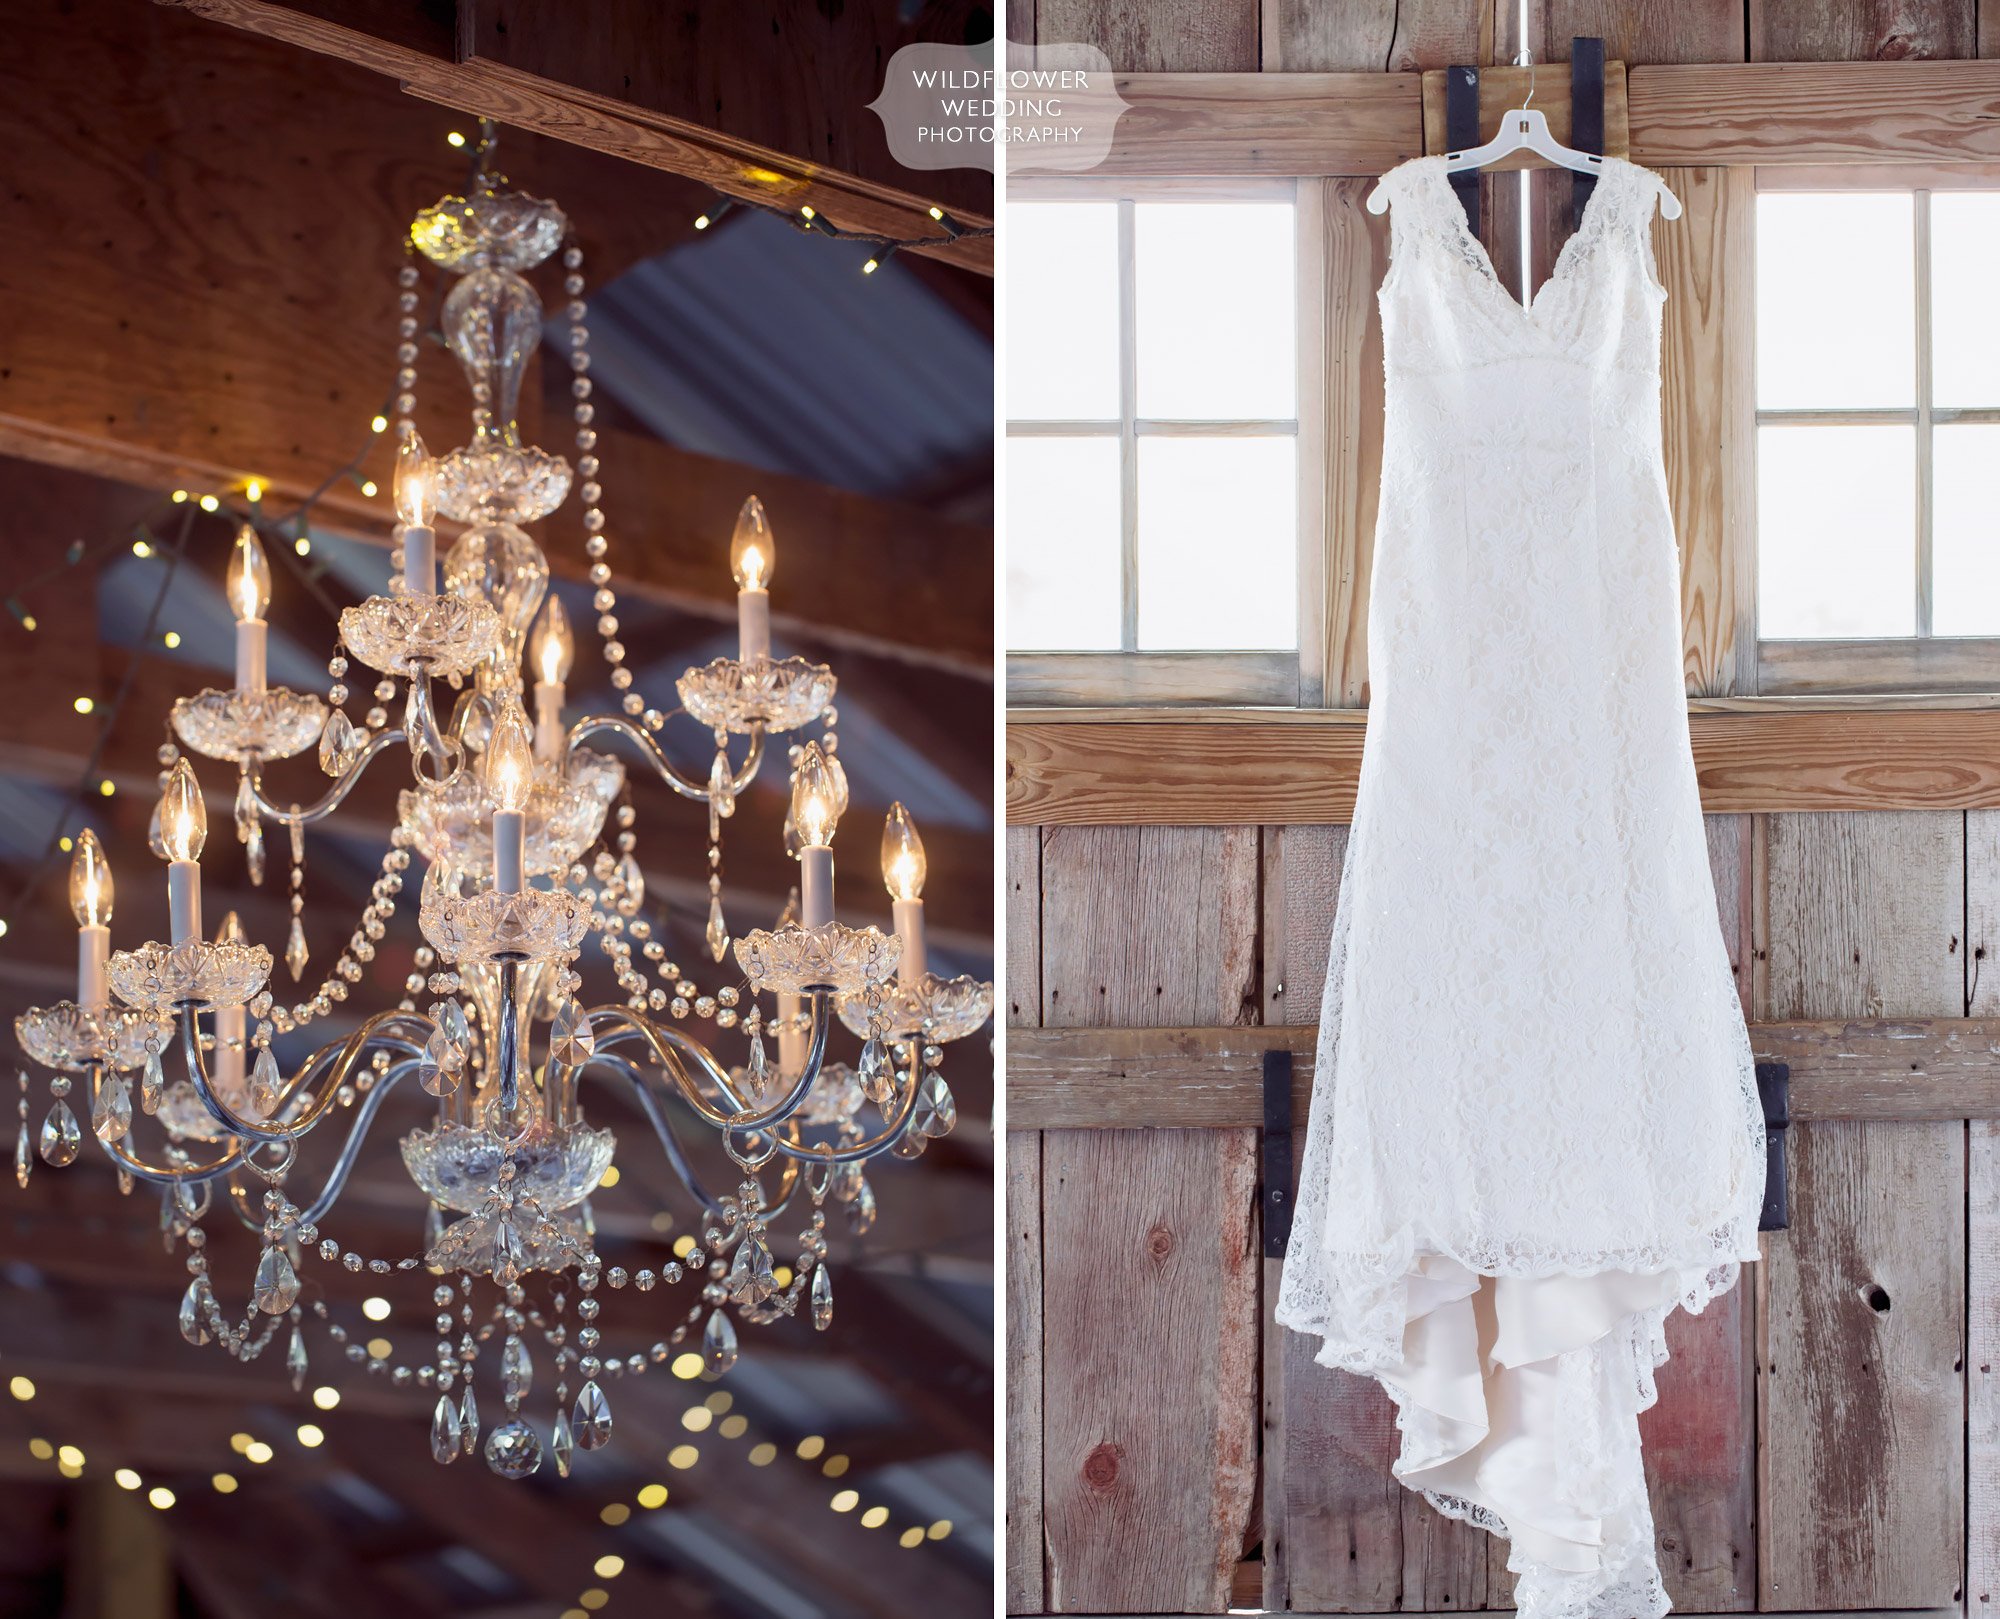 Rustic chic wedding venue at the Weston Red Barn Farm just north of KC.